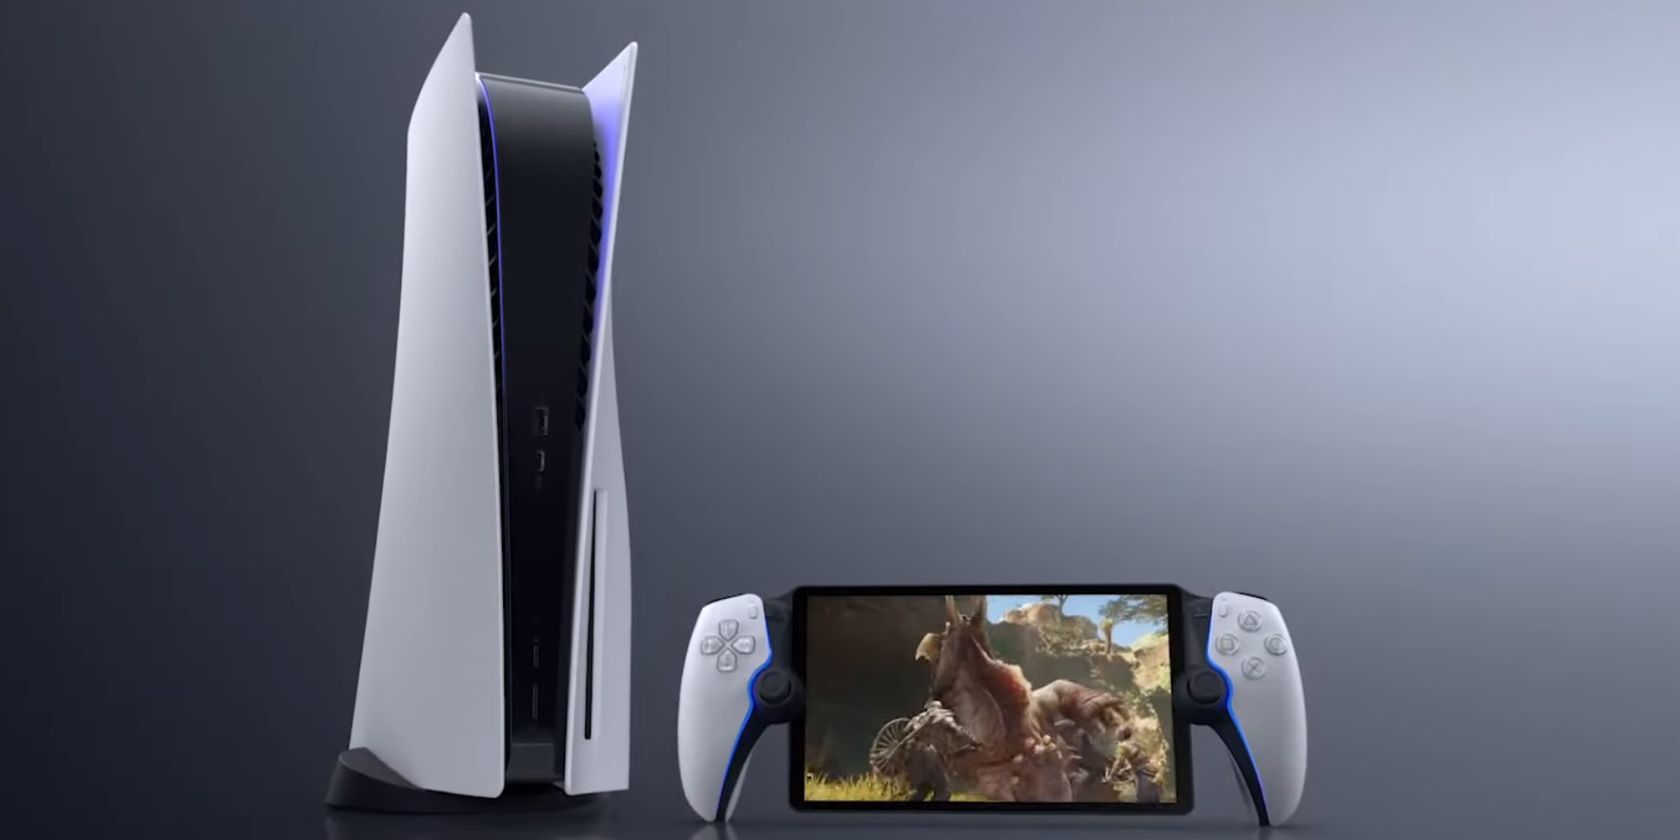 Introducing the Revamped PlayStation 5 Slim